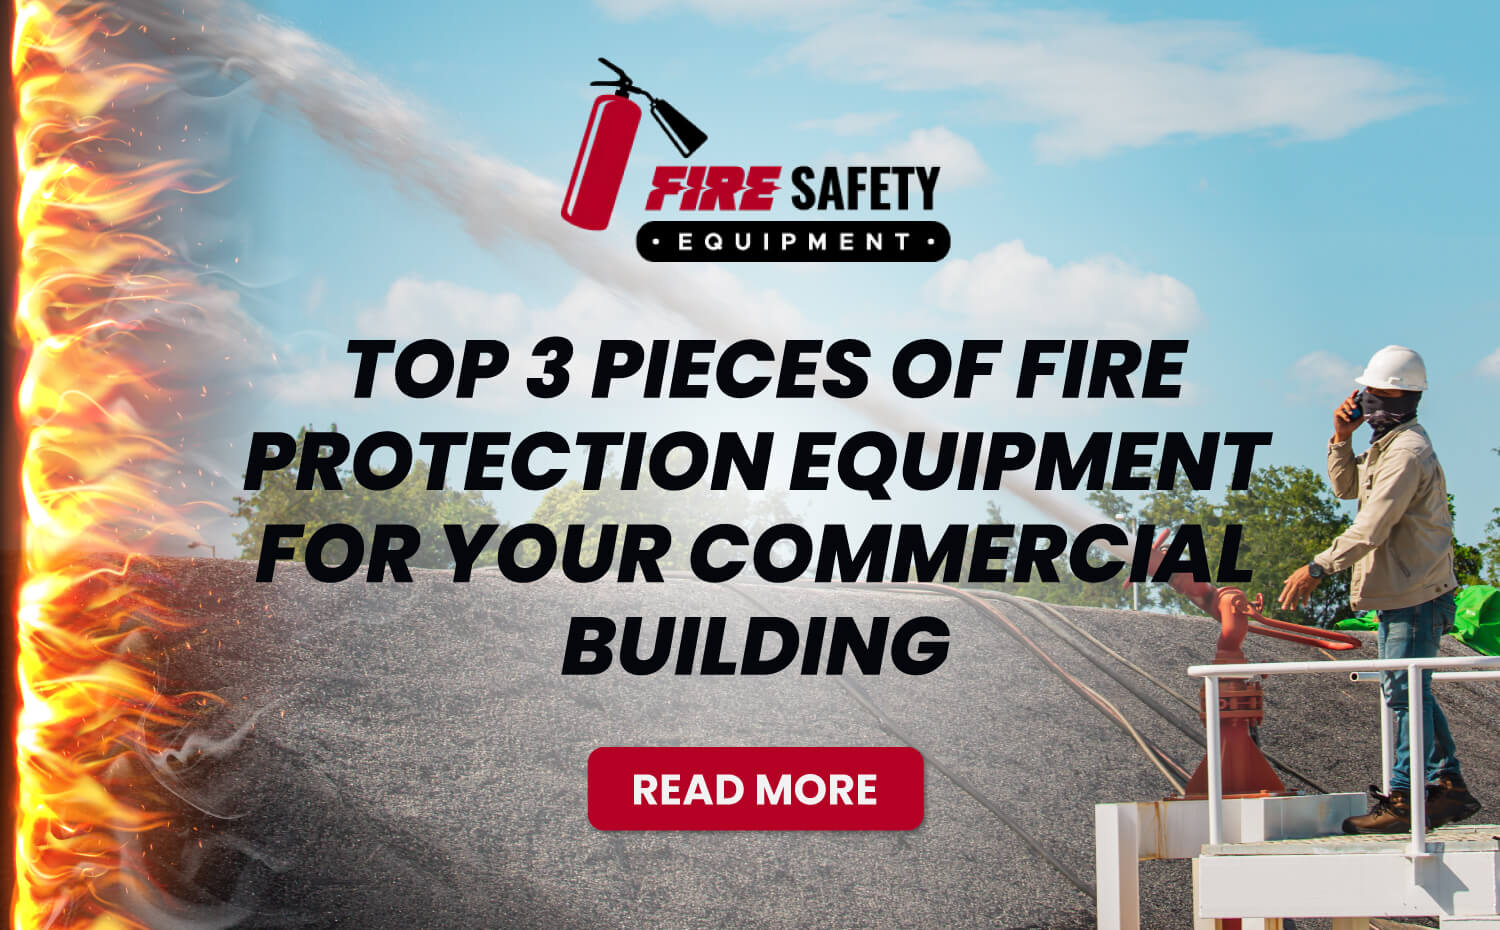 Top 3 Pieces of Fire Protection Equipment for Your Commercial Building